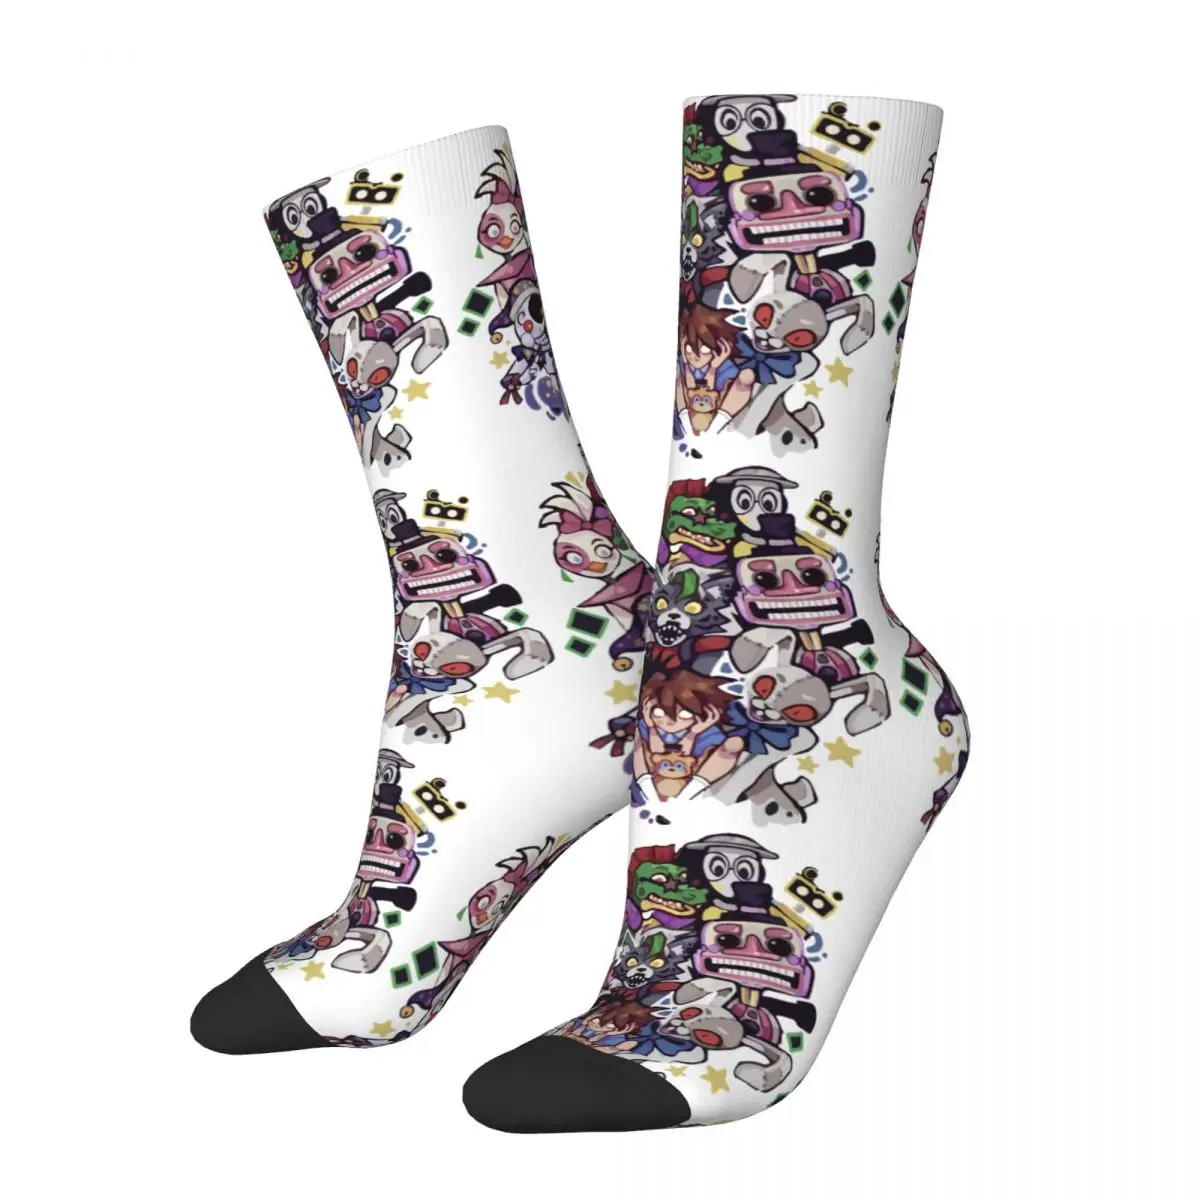 

Funny Crazy Sock for Men Cartoon Security Breach Classic Hip Hop Vintage FNAF Game Happy Quality Pattern Printed Boys Crew Sock